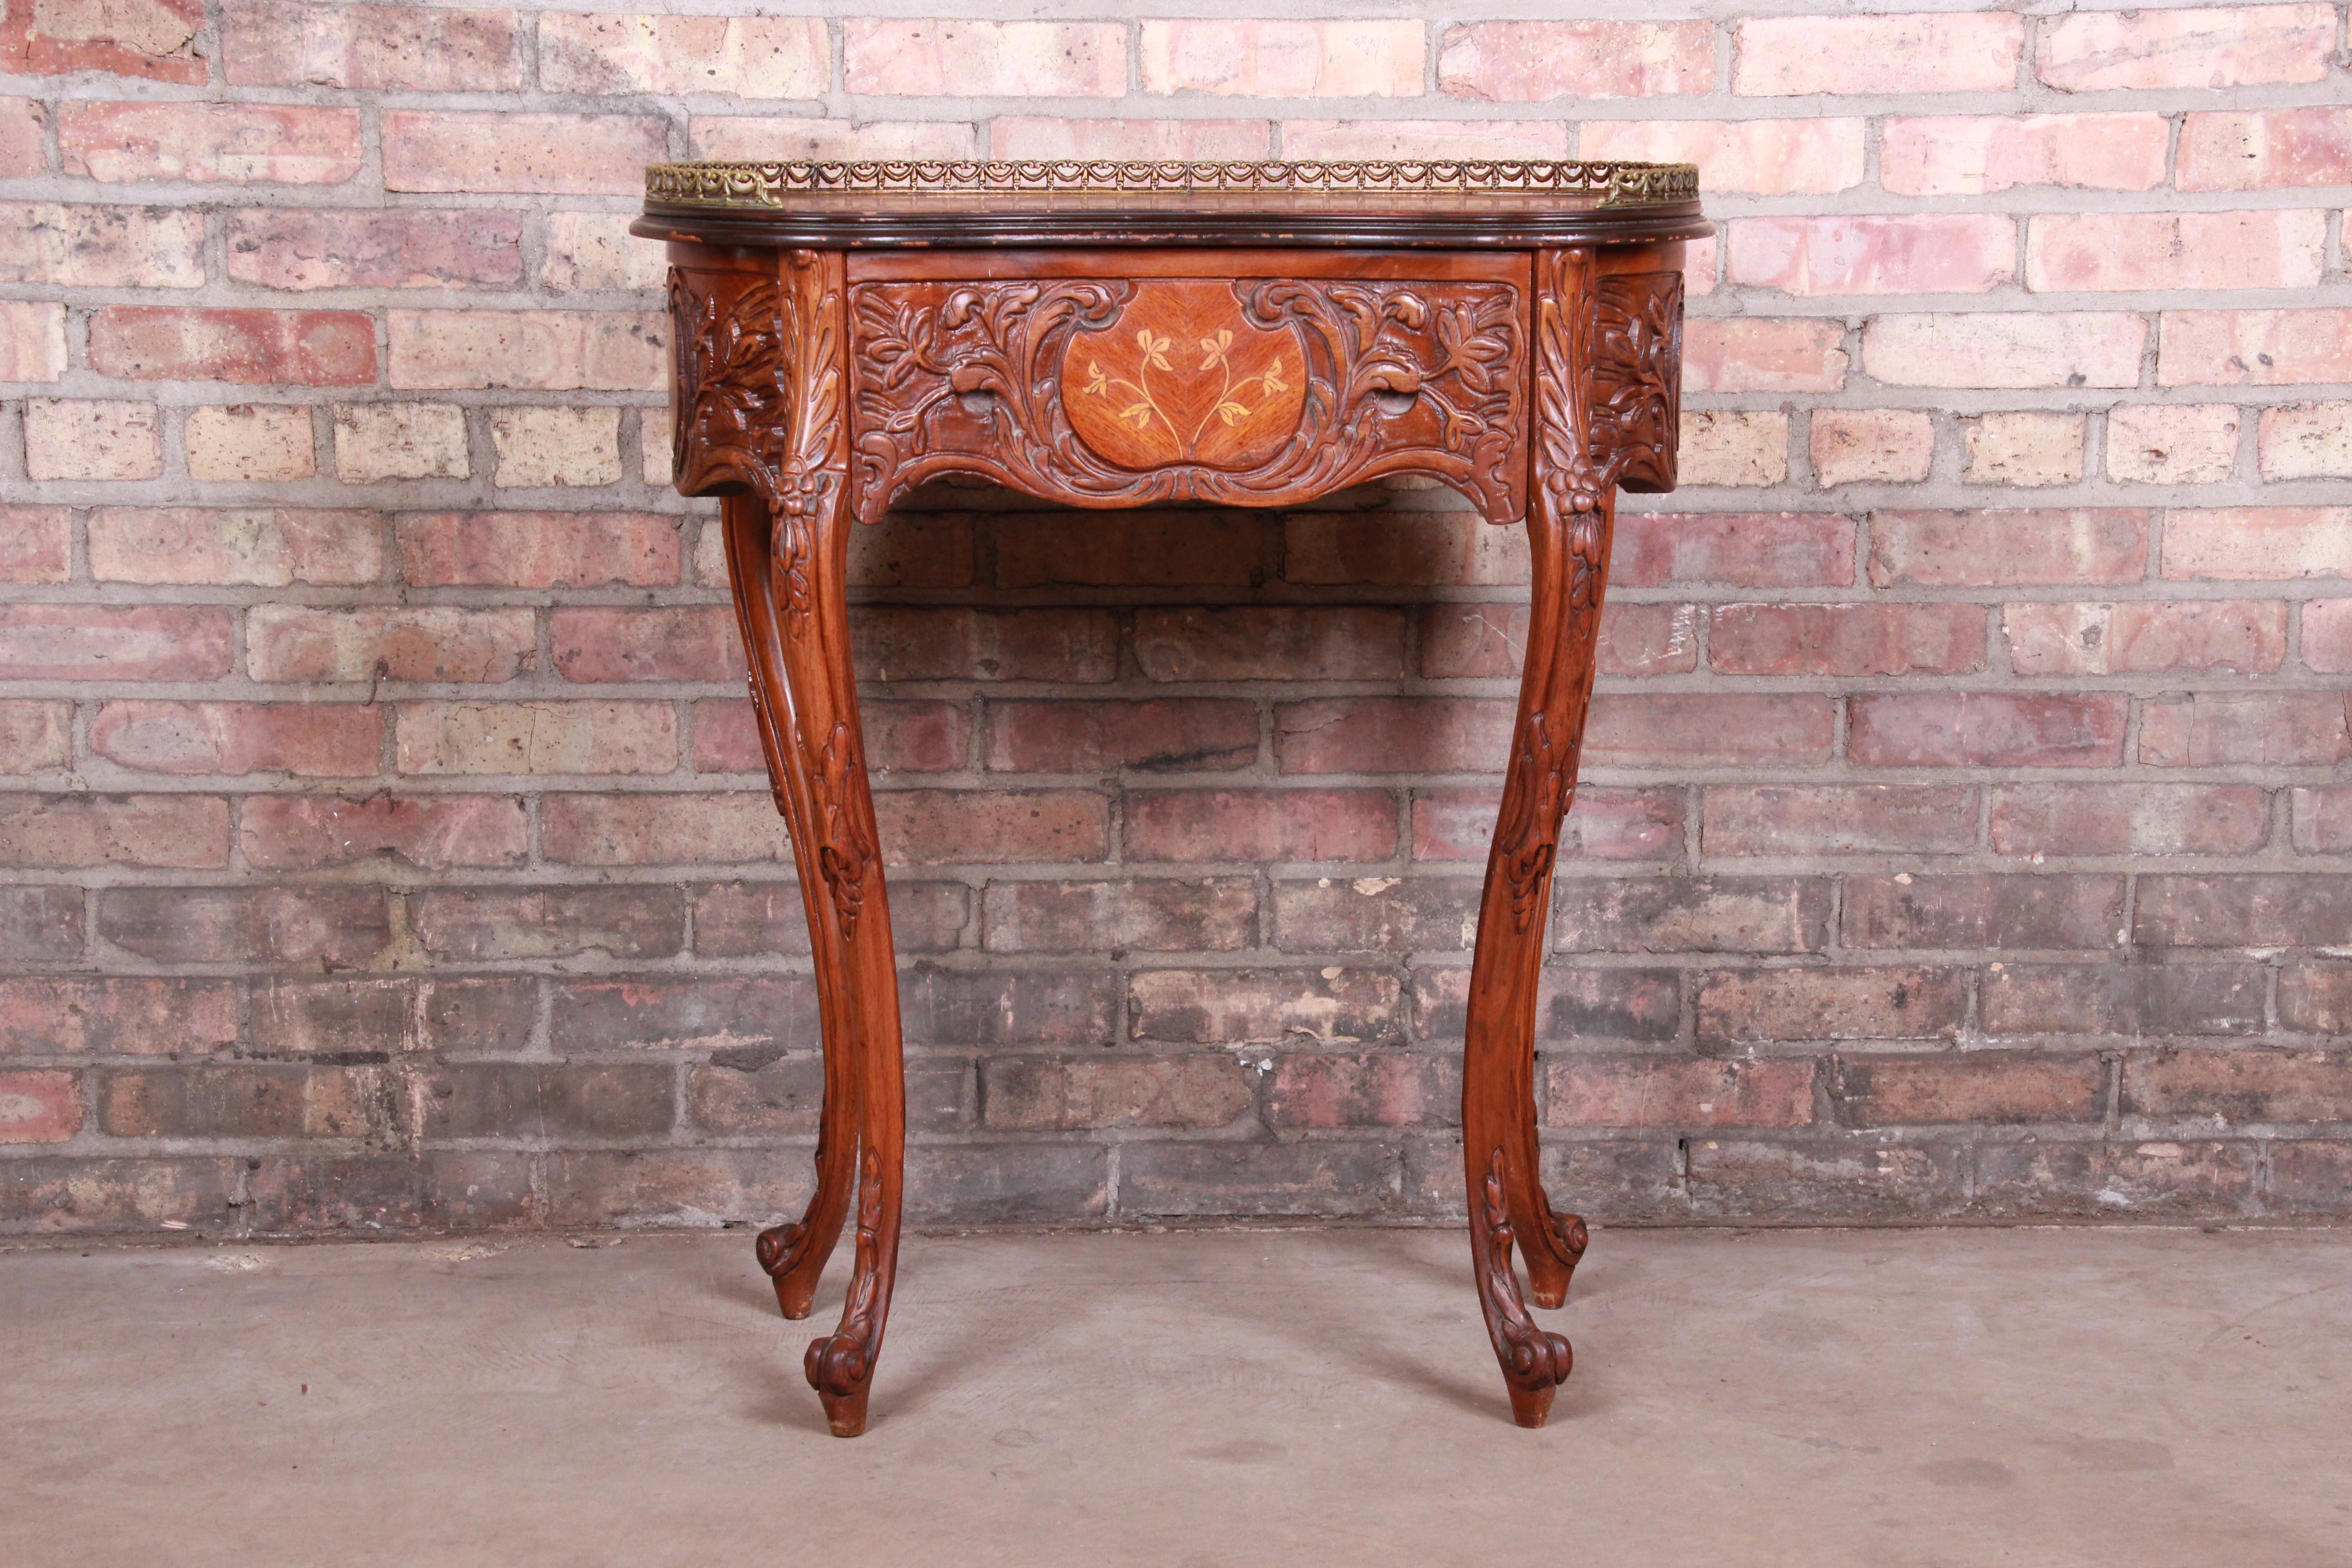 A gorgeous French carved Louis XV style kidney-shaped nightstand or side table

circa 1940s

Carved mahogany, with inlaid satinwood floral marquetry and brass gallery.

Measures: 27.5